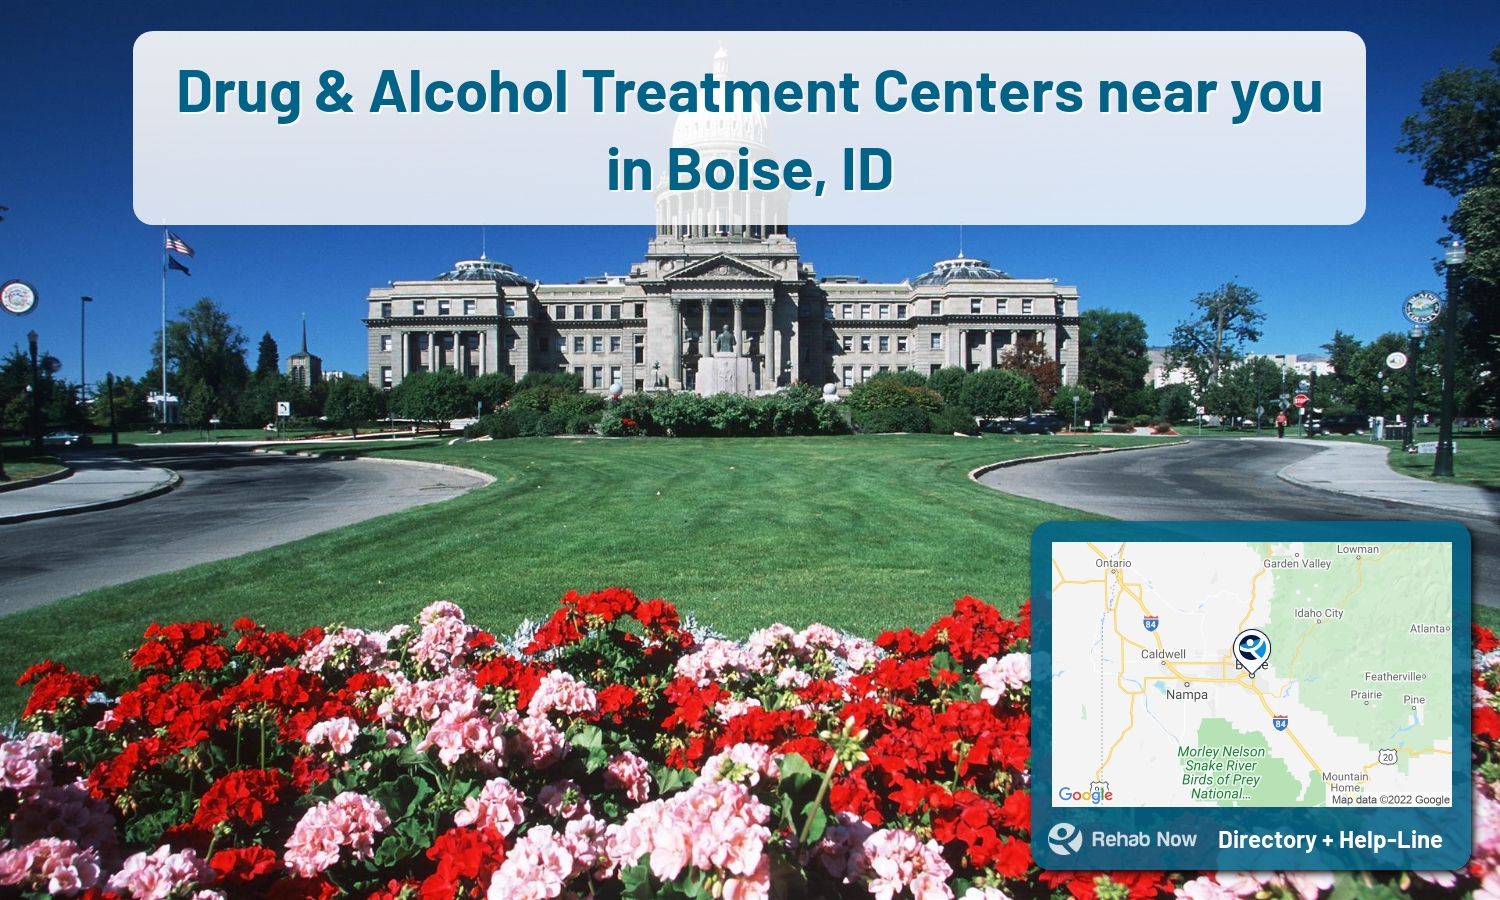 Ready to pick a rehab center in Boise? Get off alcohol, opiates, and other drugs, by selecting top drug rehab centers in Idaho